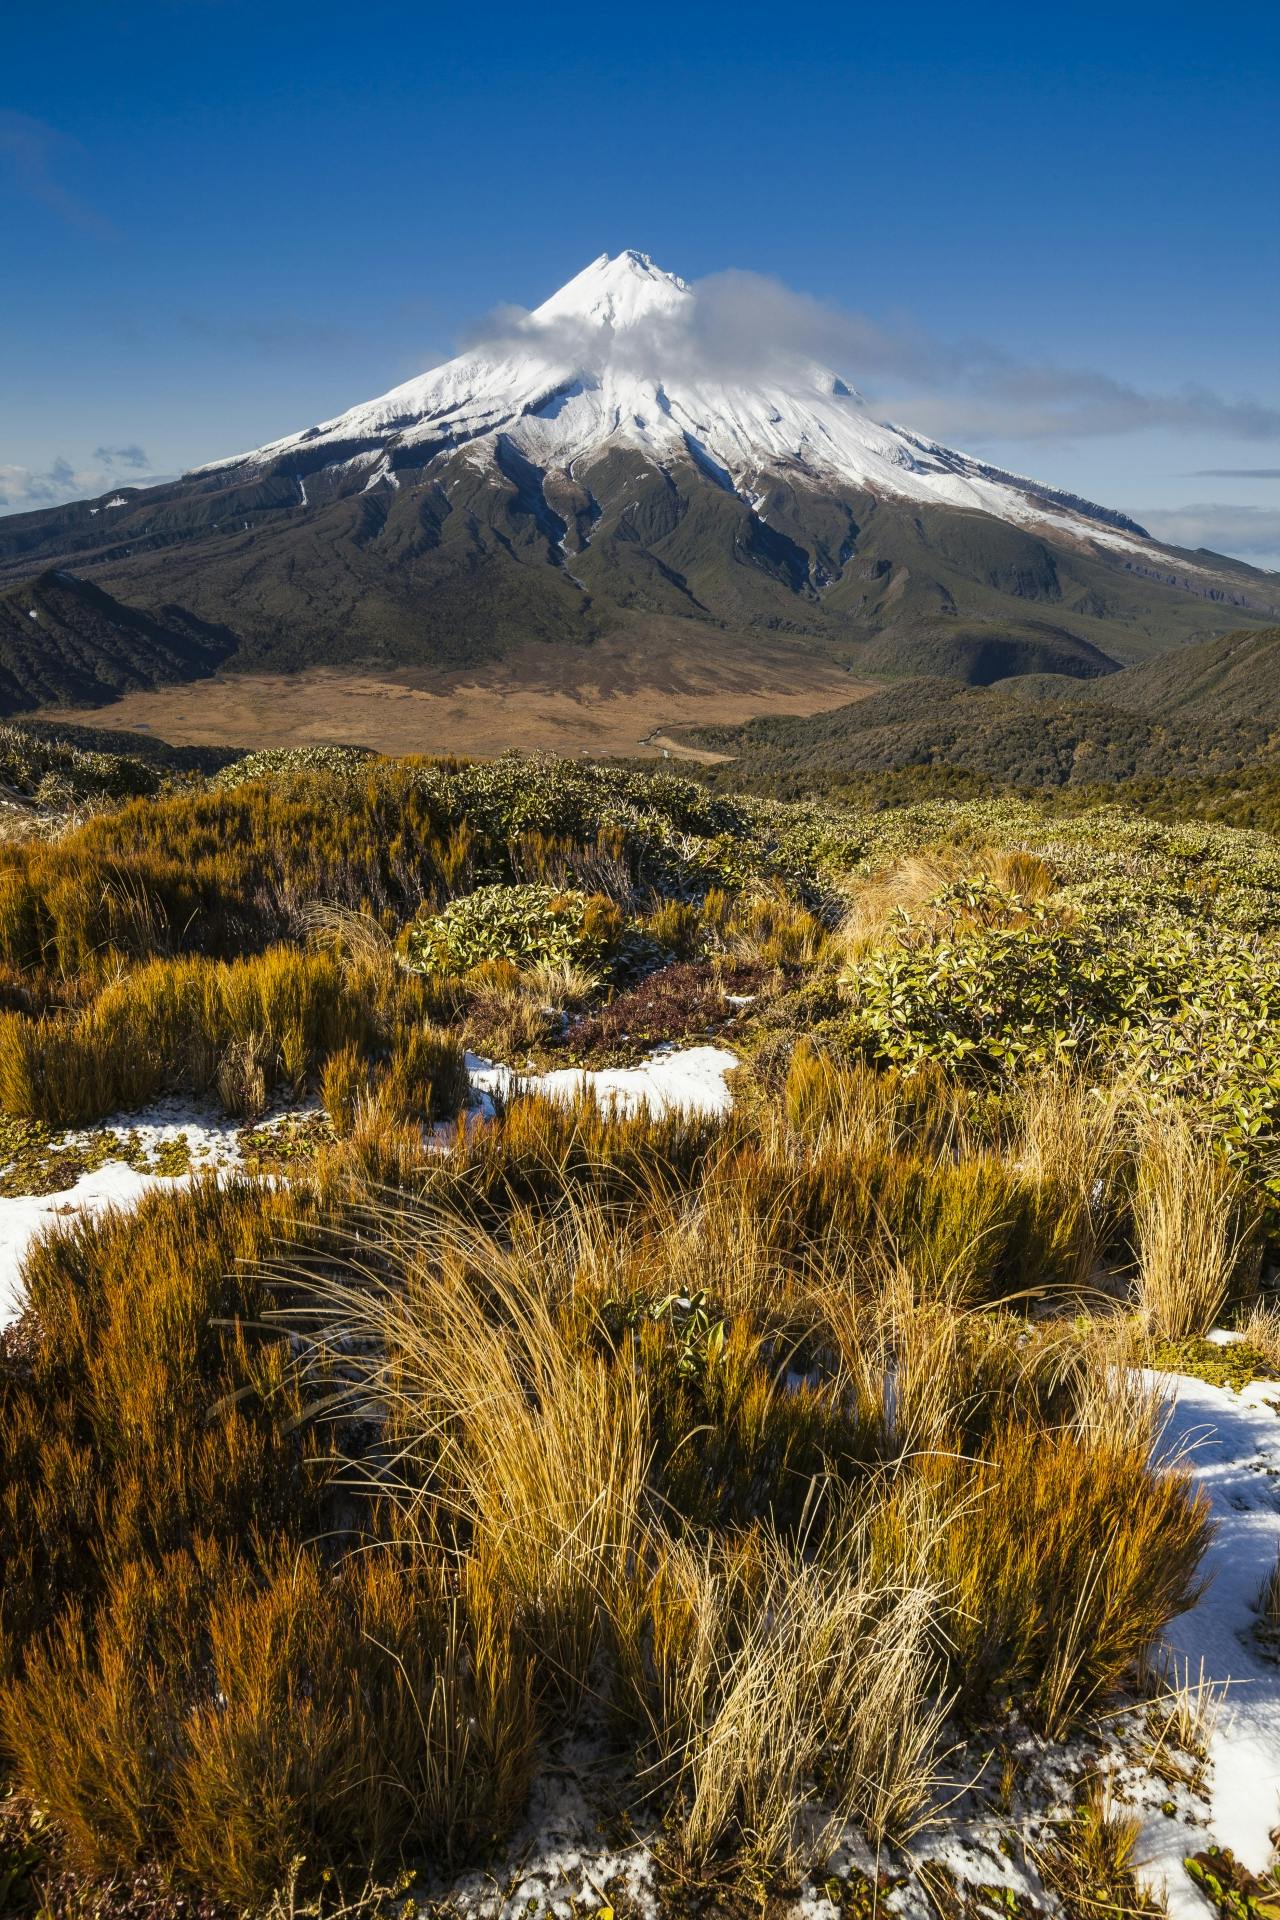 Views From Pouakai Range are arguably better than on the Tongariro northan circuit